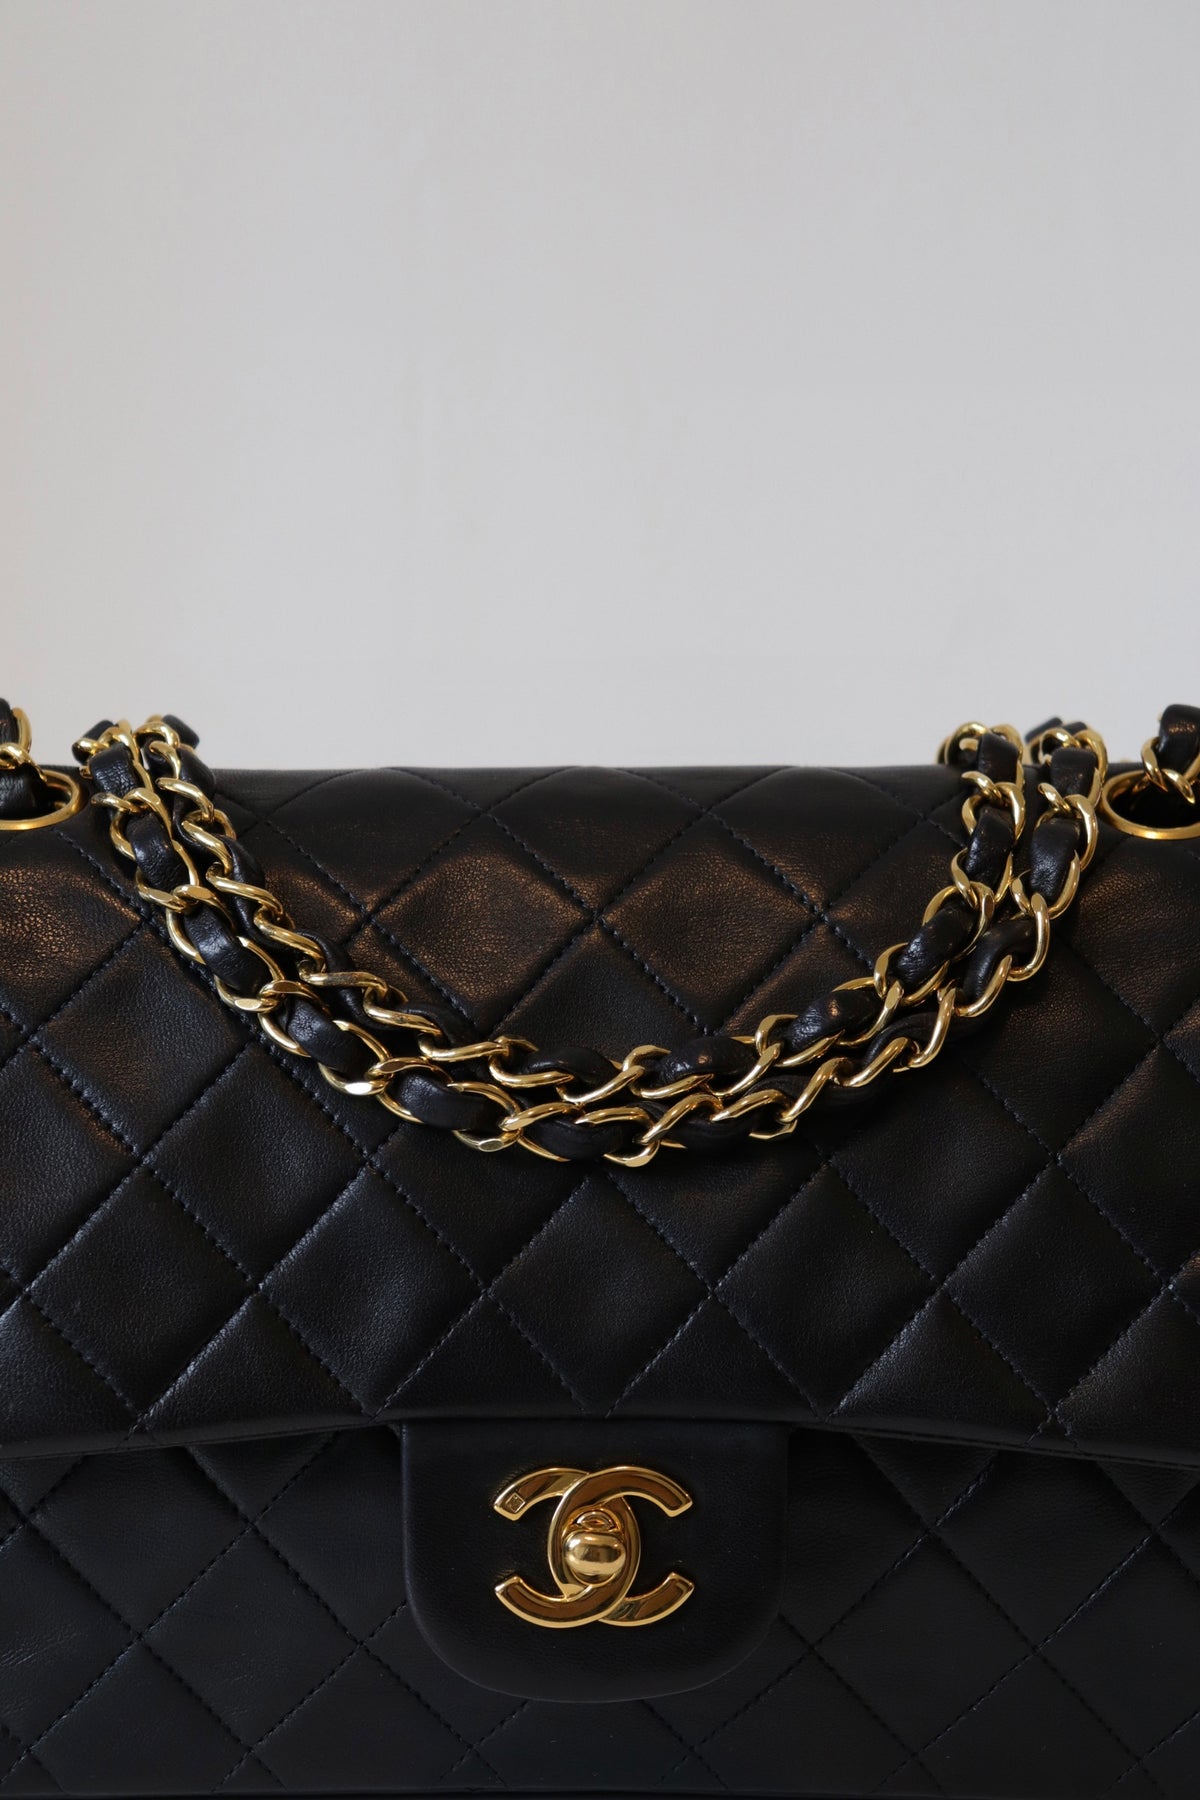 brand new chanel bags authentic